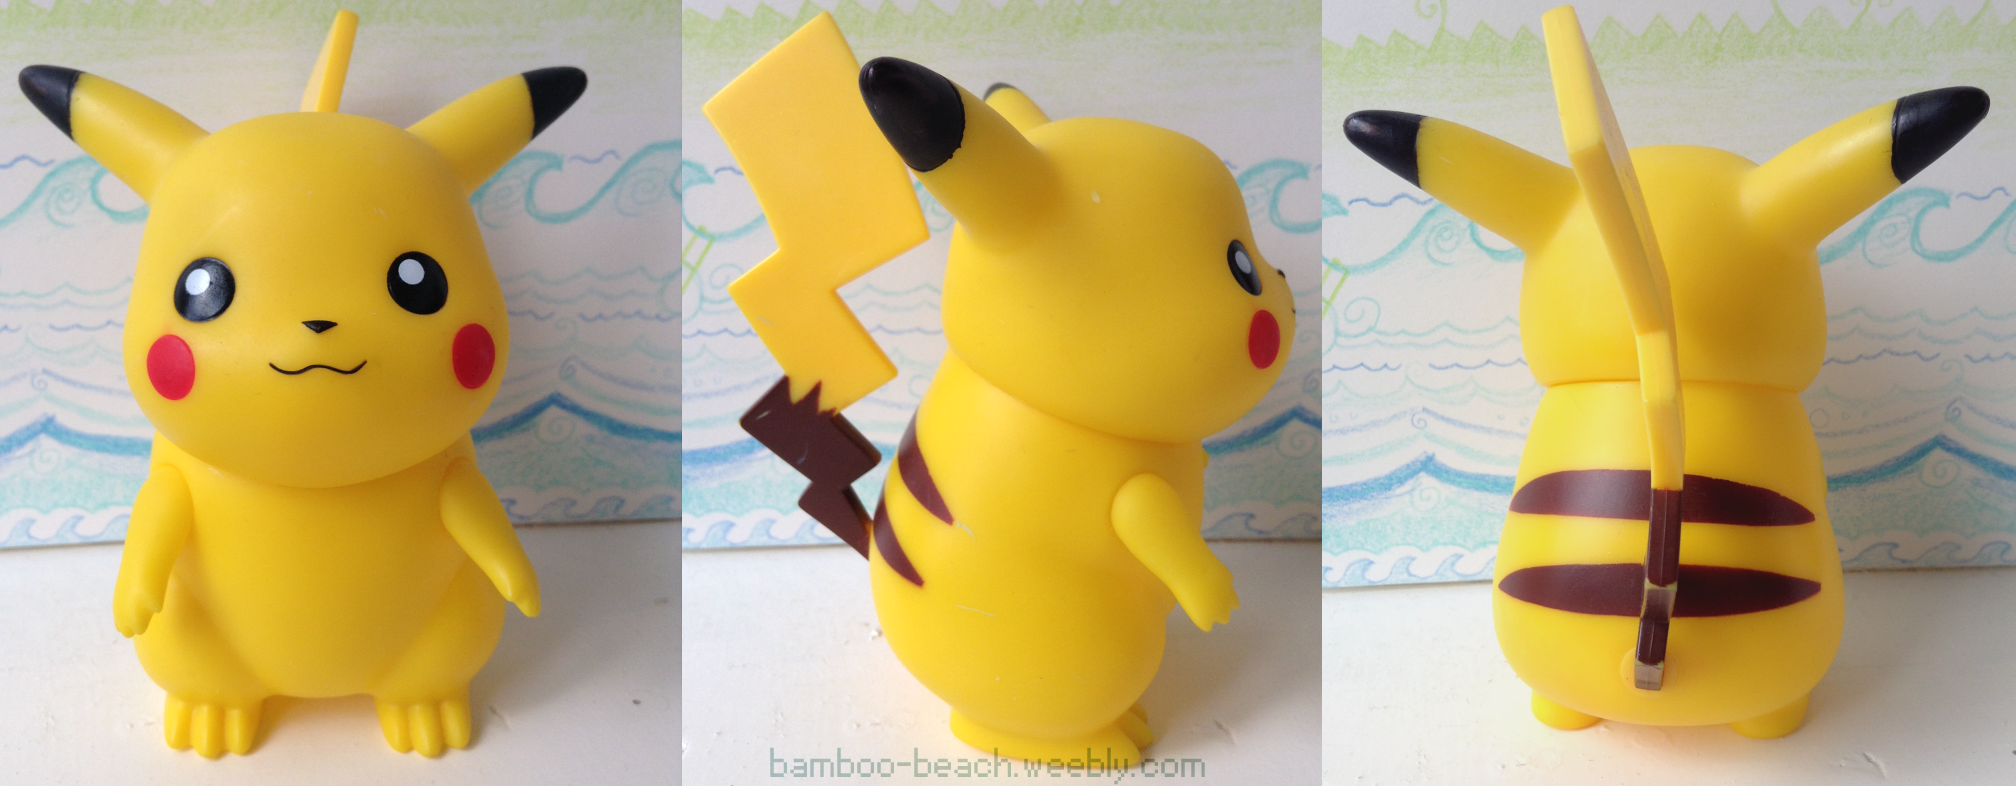 Can you spot what's wrong with this Pikachu? The Poke2016 x 786